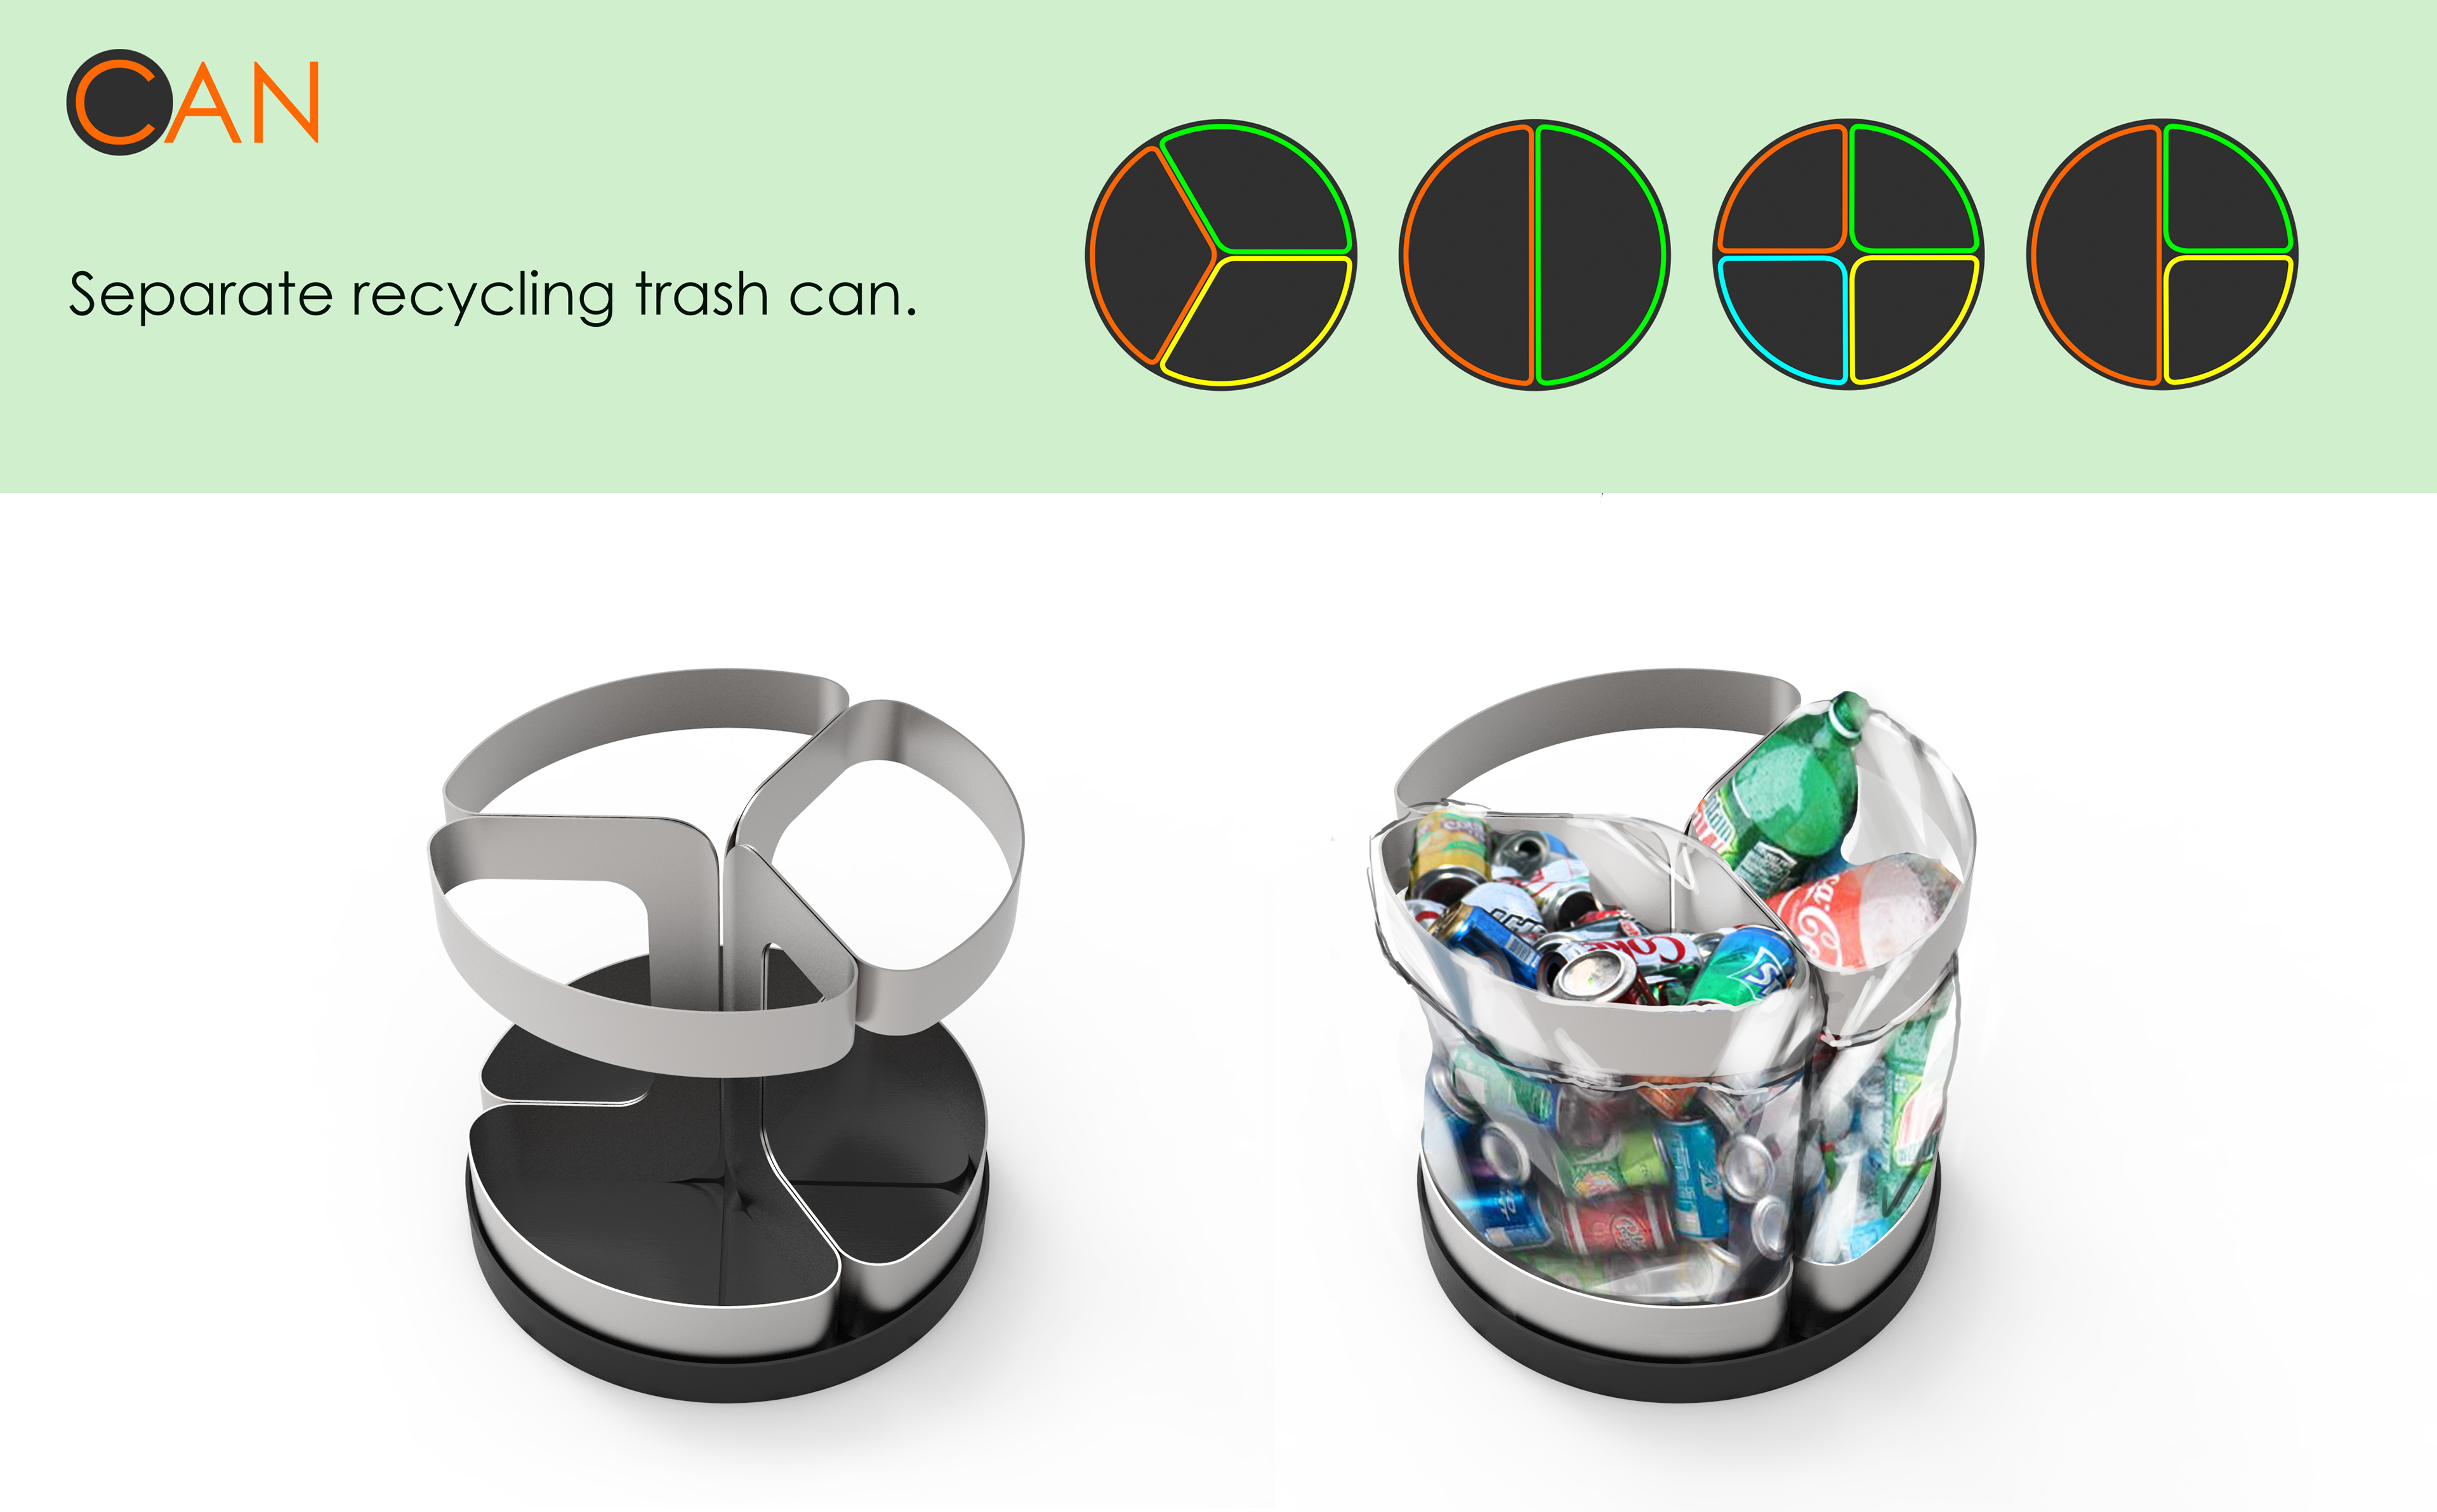 Recycle Trash. Separate Trash cans. Mr. Trash Wheel. Scheme of making a Smart Trash can AUTOCAT.